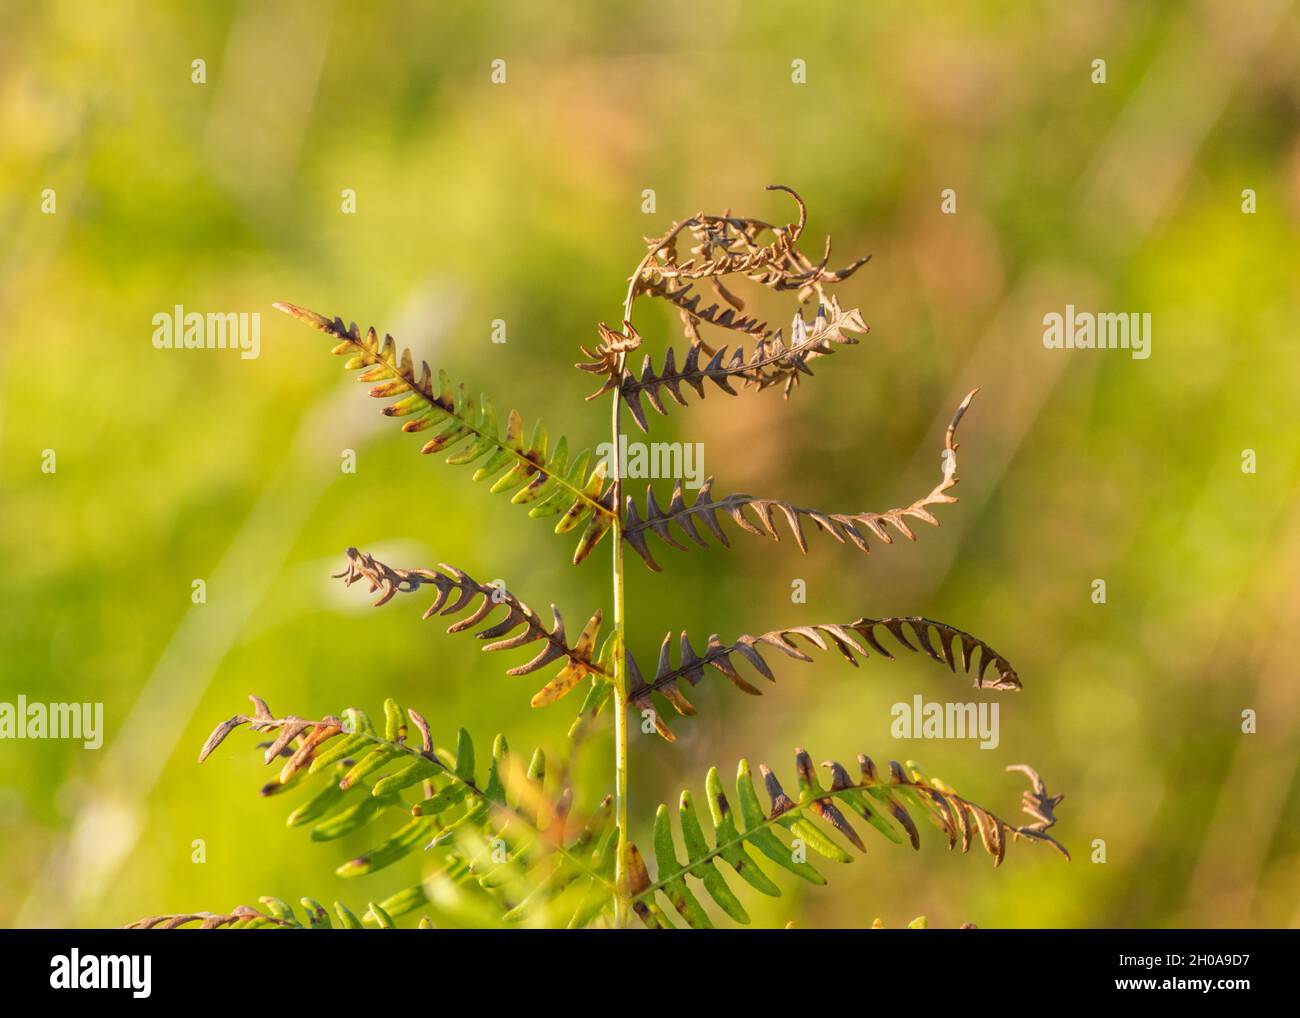 Common bracken or eagle fern branch with dry leaves in autumn against blurry background Stock Photo